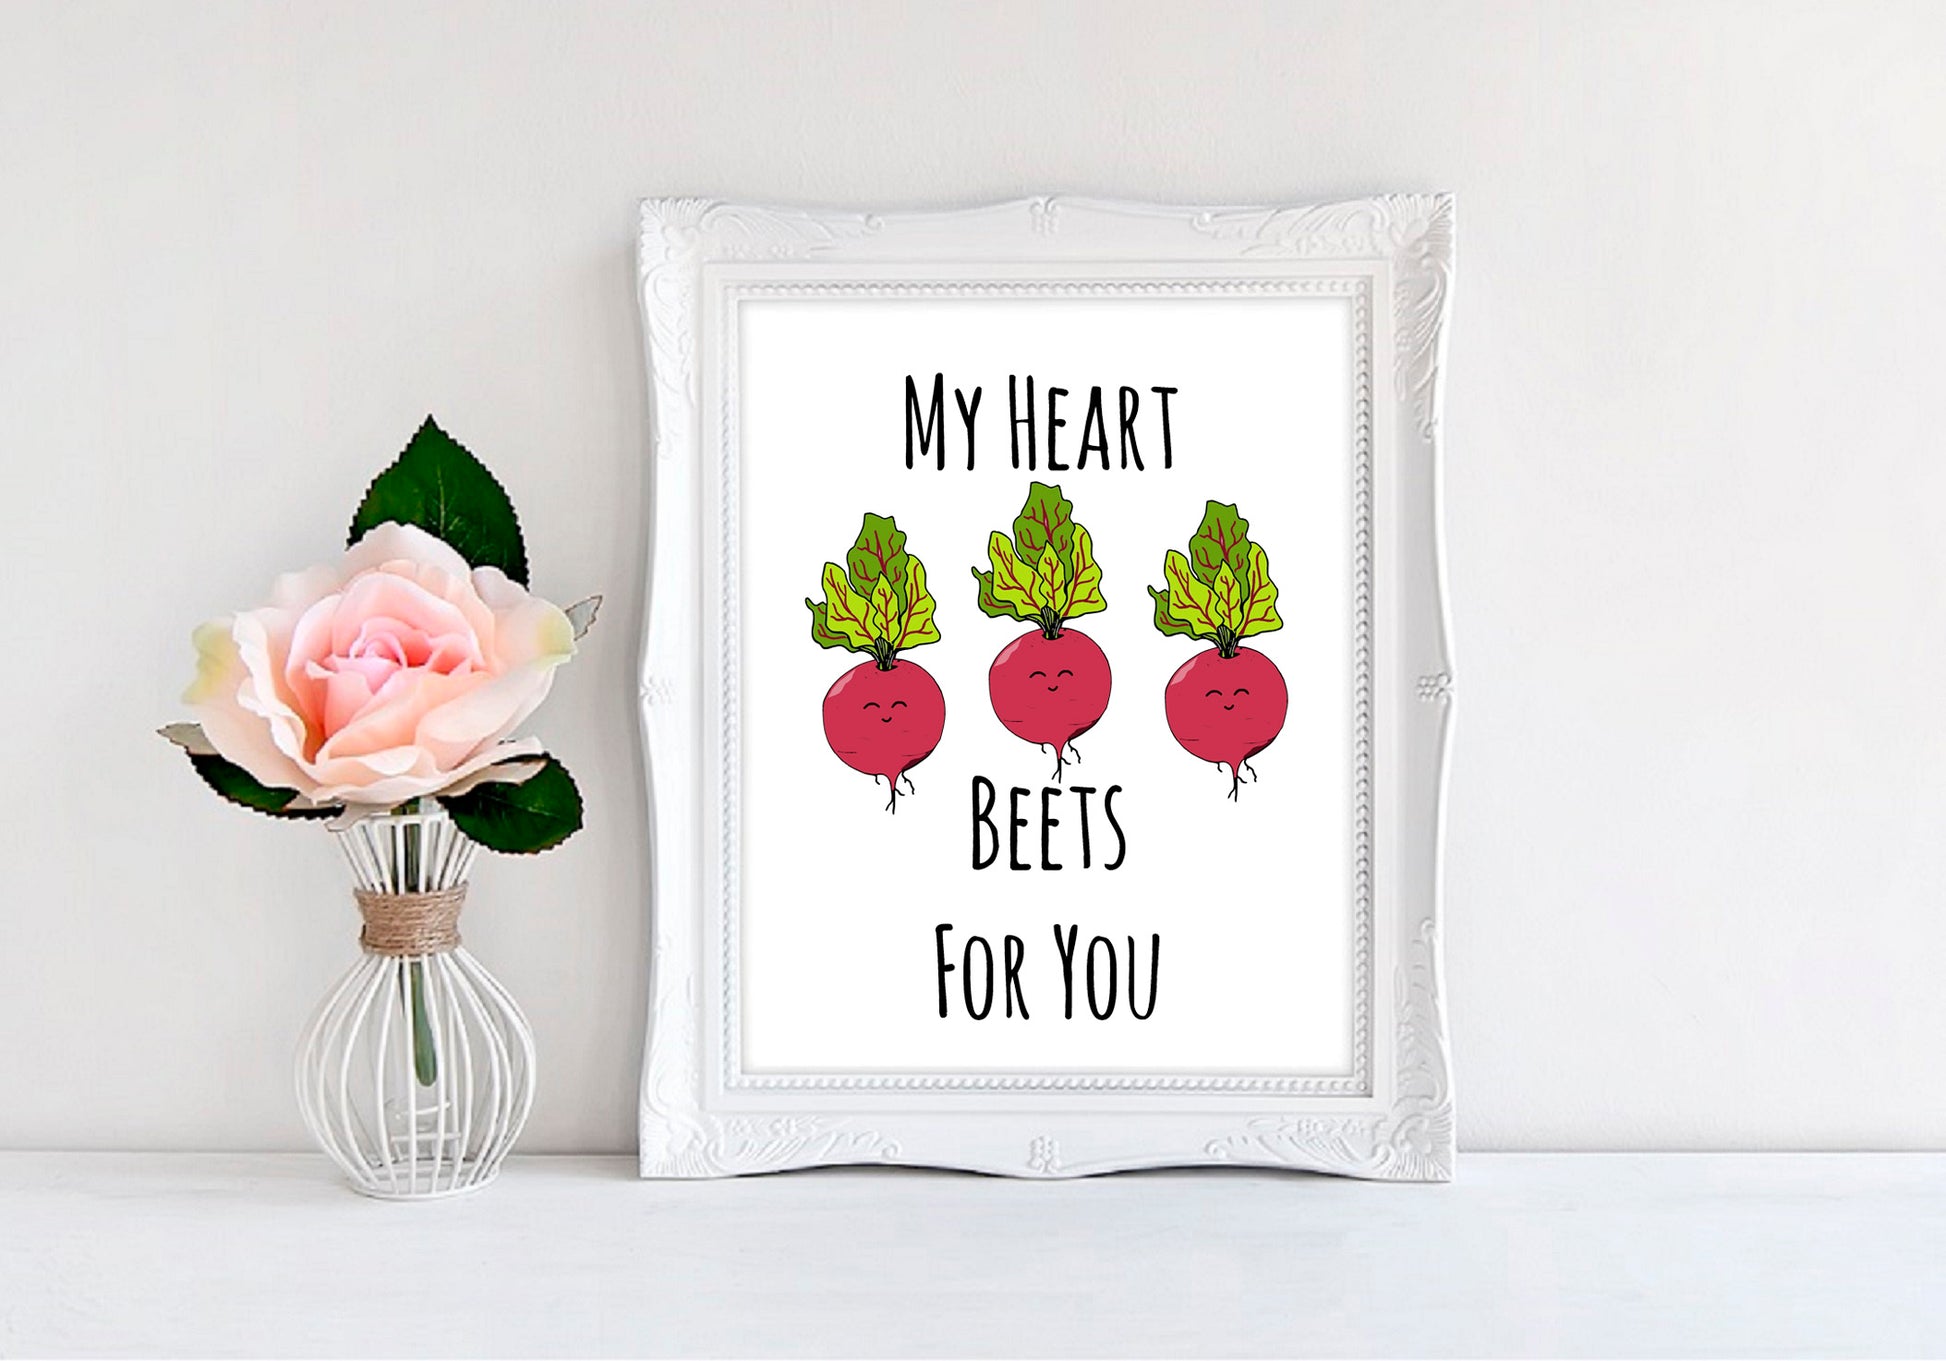 My Heart Beets For You - 8"x10" Wall Print - MoonlightMakers